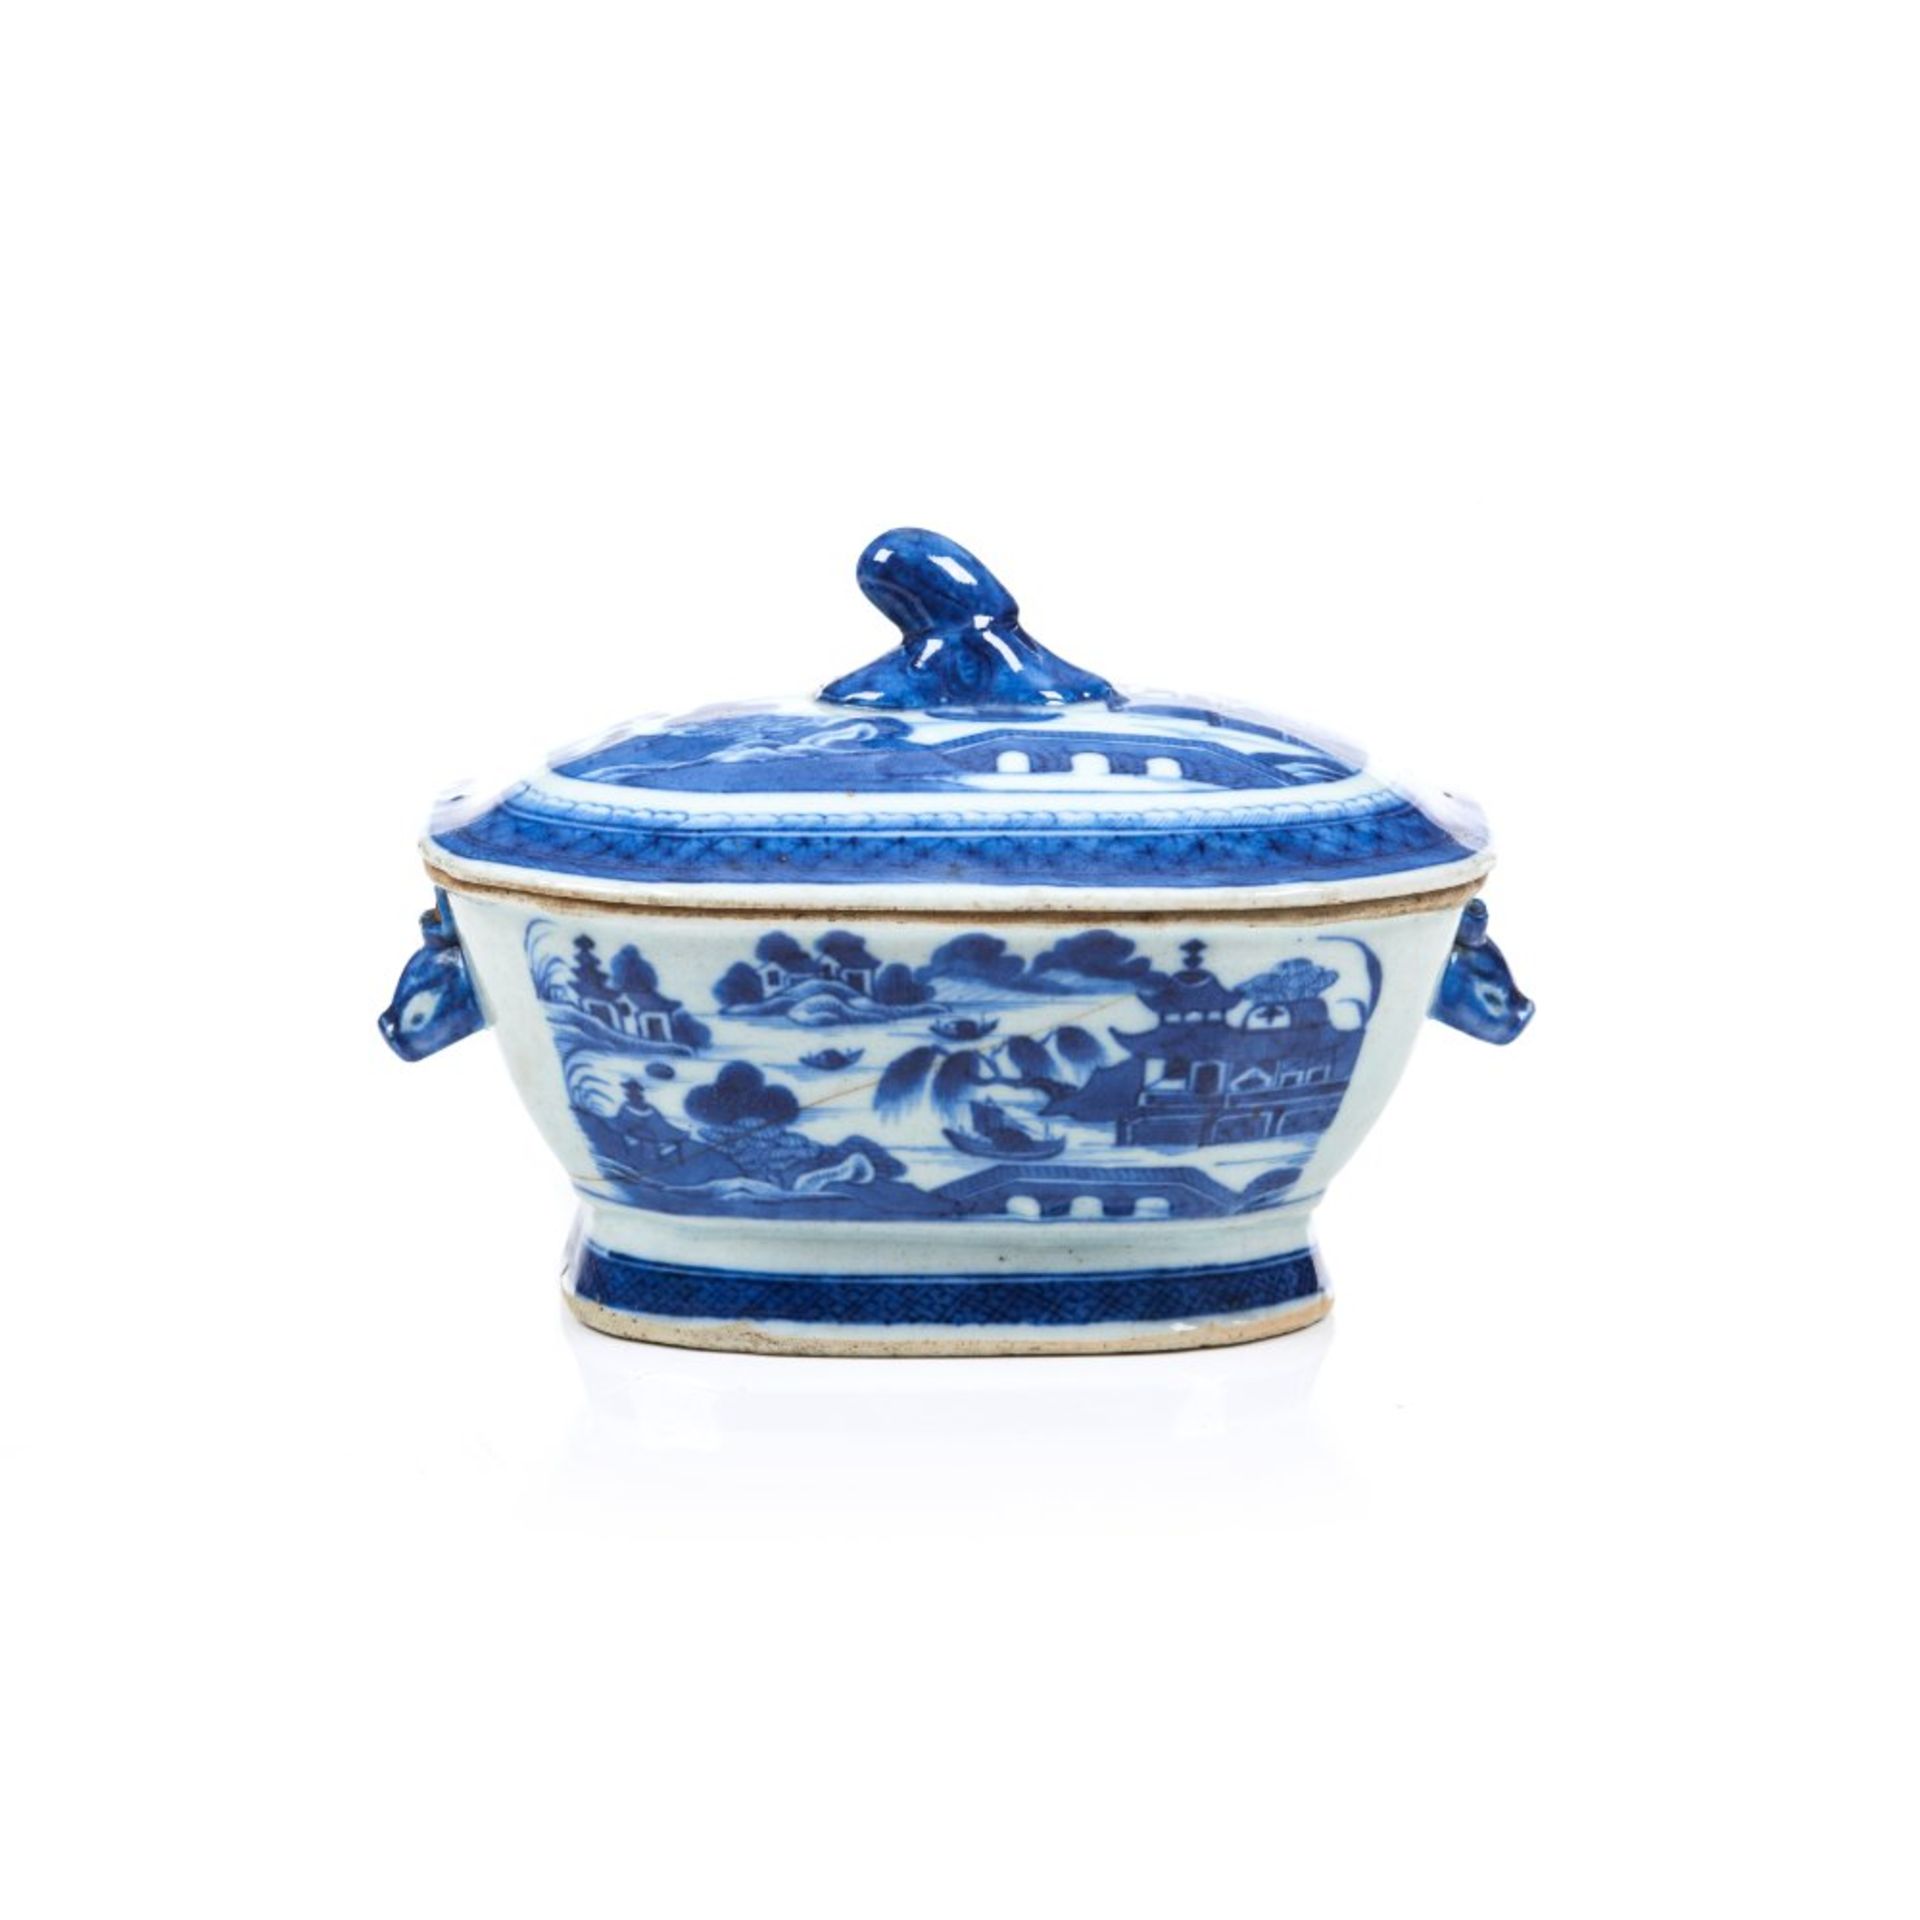 A small tureen and cover